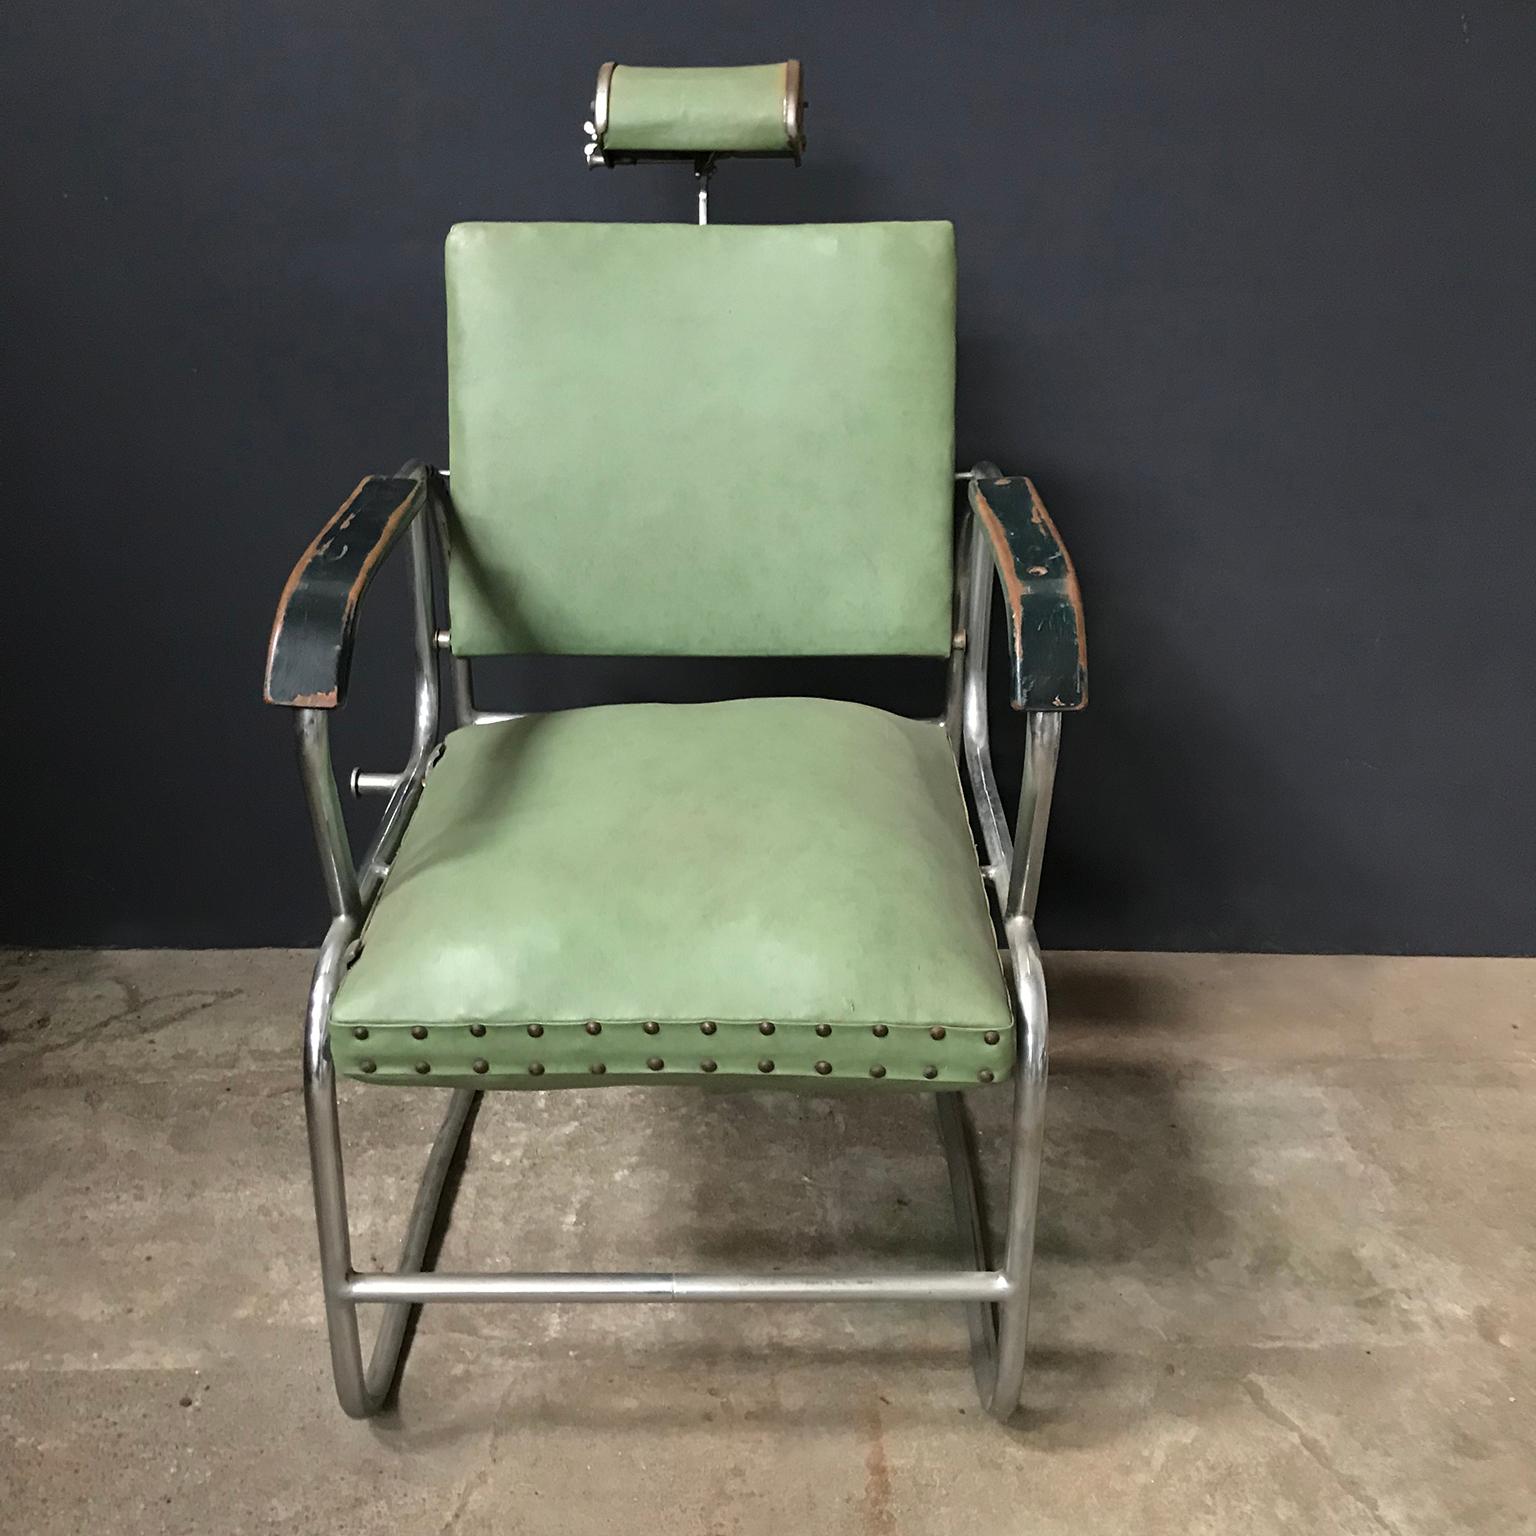 Original Barber Chair with Original Green Upholstery, Rotated Seat, circa 1950 4